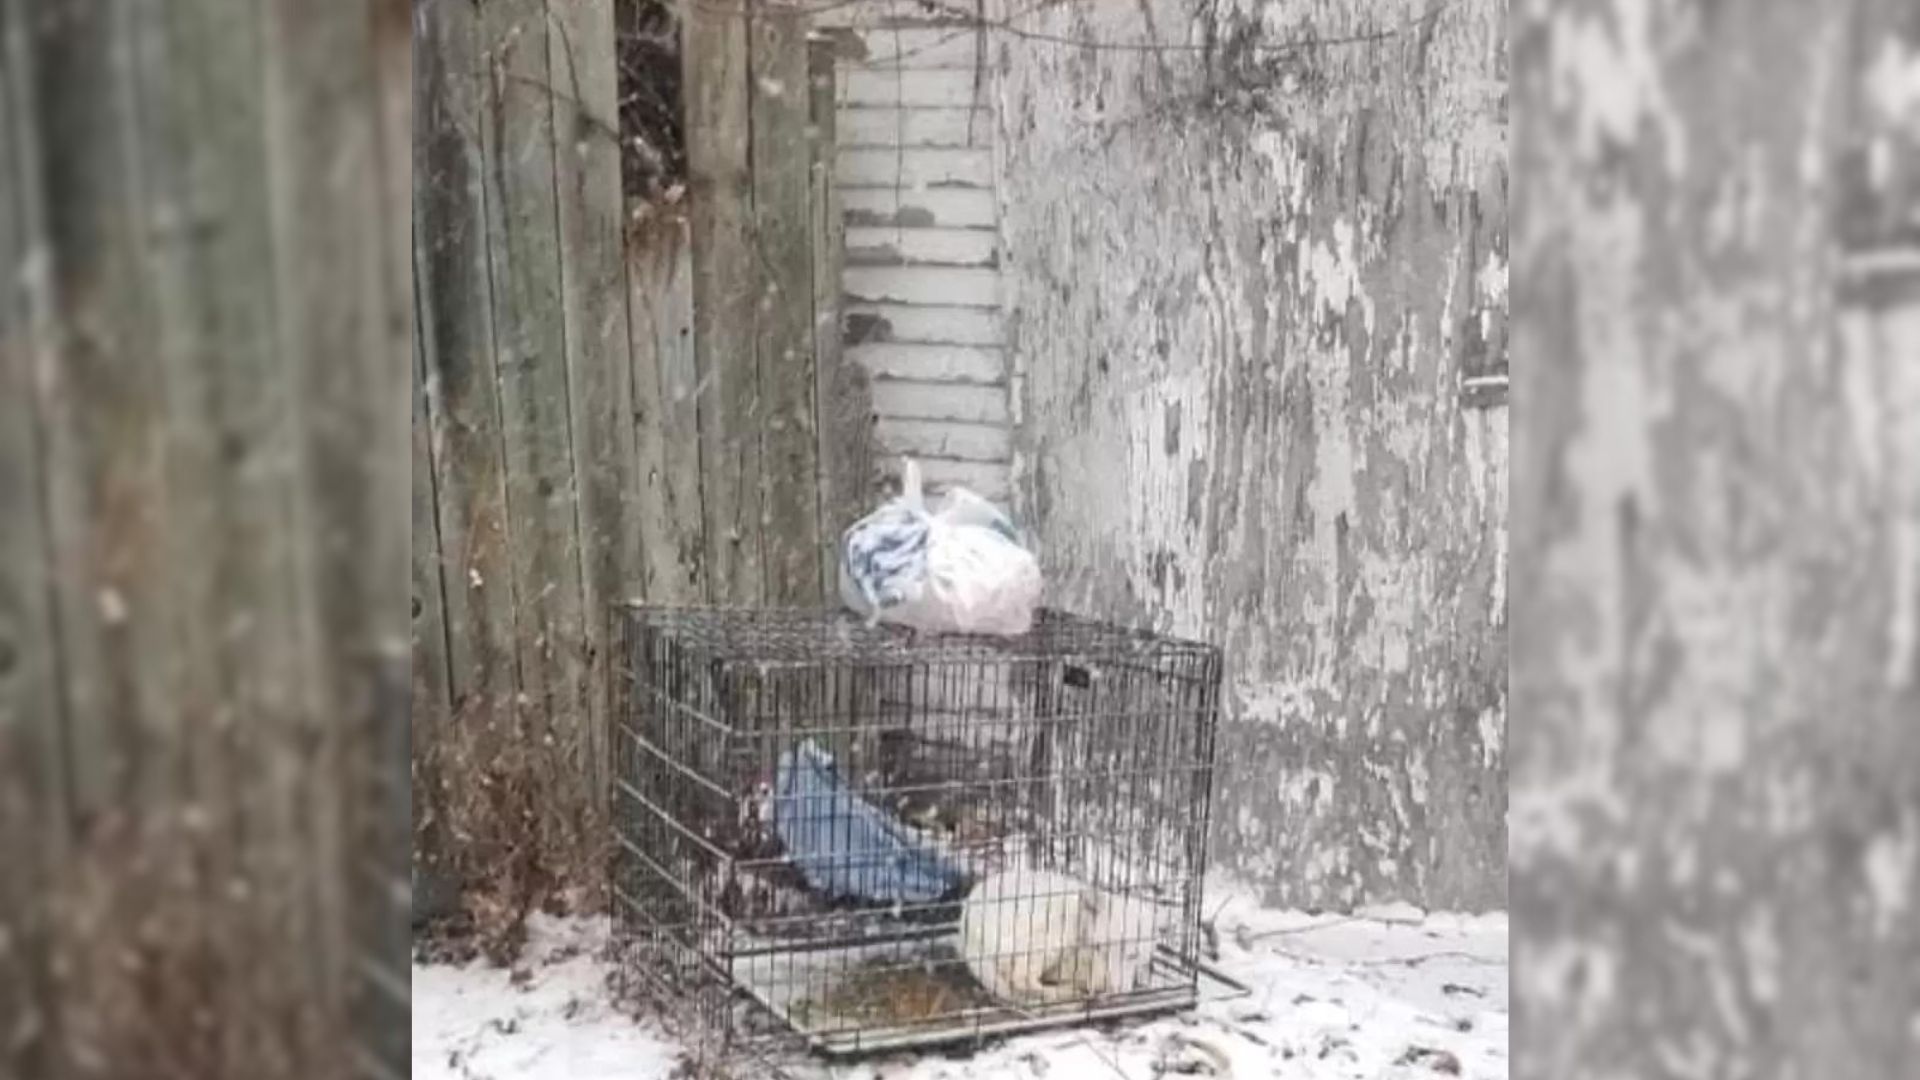 Rescuers Were Surprised By What They Found In A Small Iron Crate